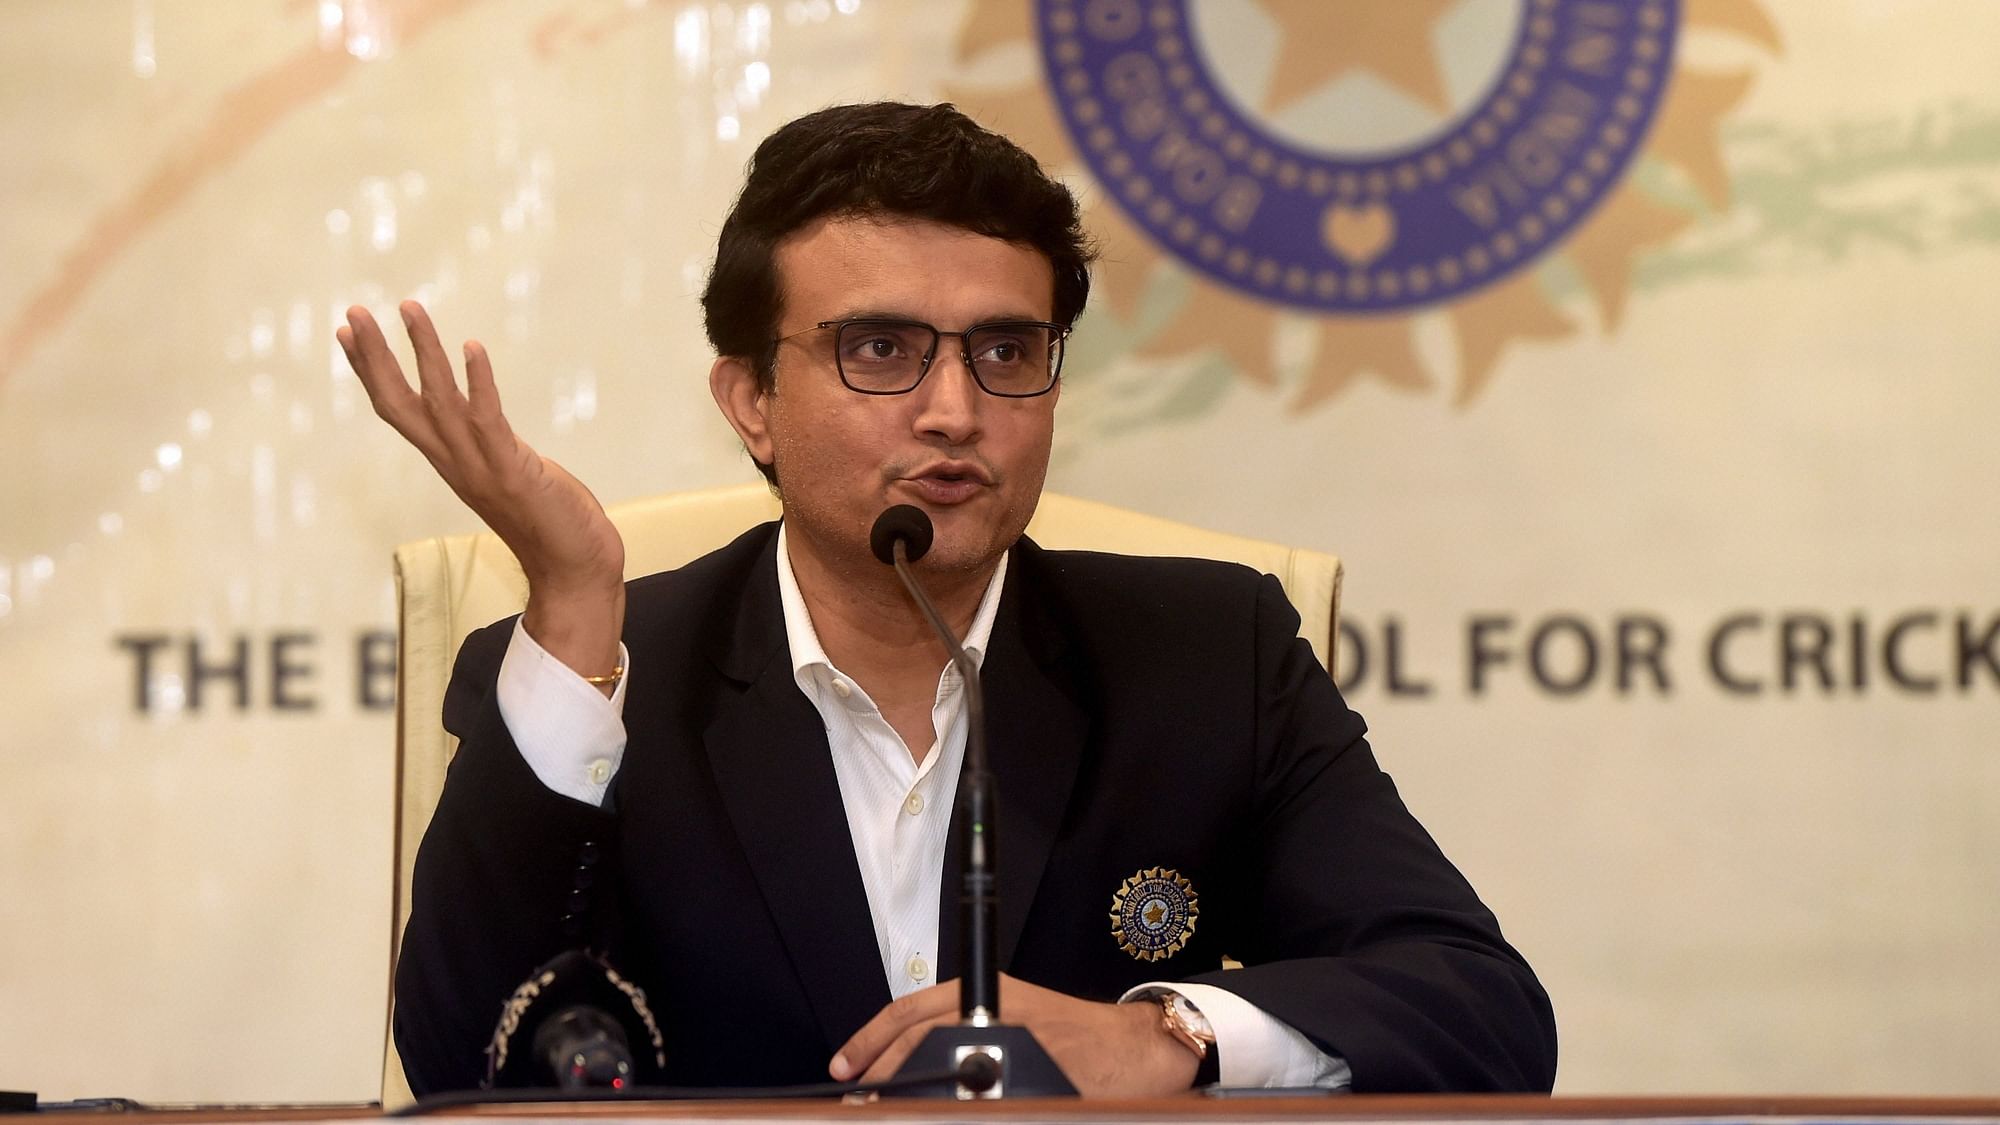 Sourav Ganguly has addressed poor attendance numbers in tests.